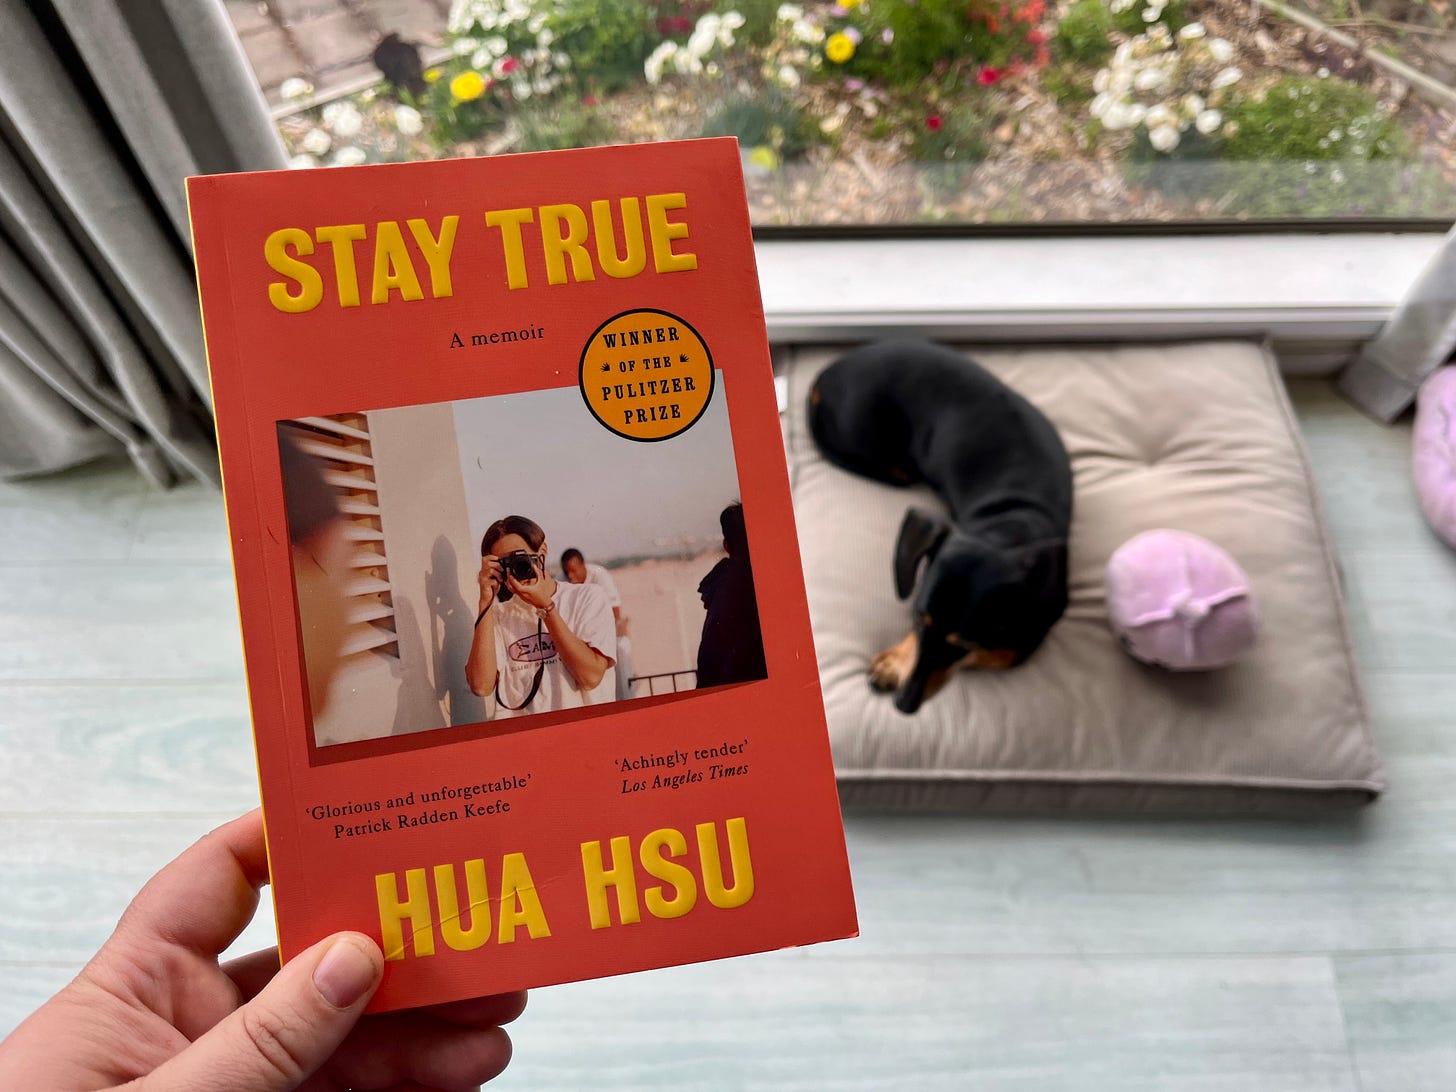 in the foreground a hand holds Hua Hsu's memoir Stay True. In the background a black dachshund sits on a cushion, next to a purple plush dumpling.